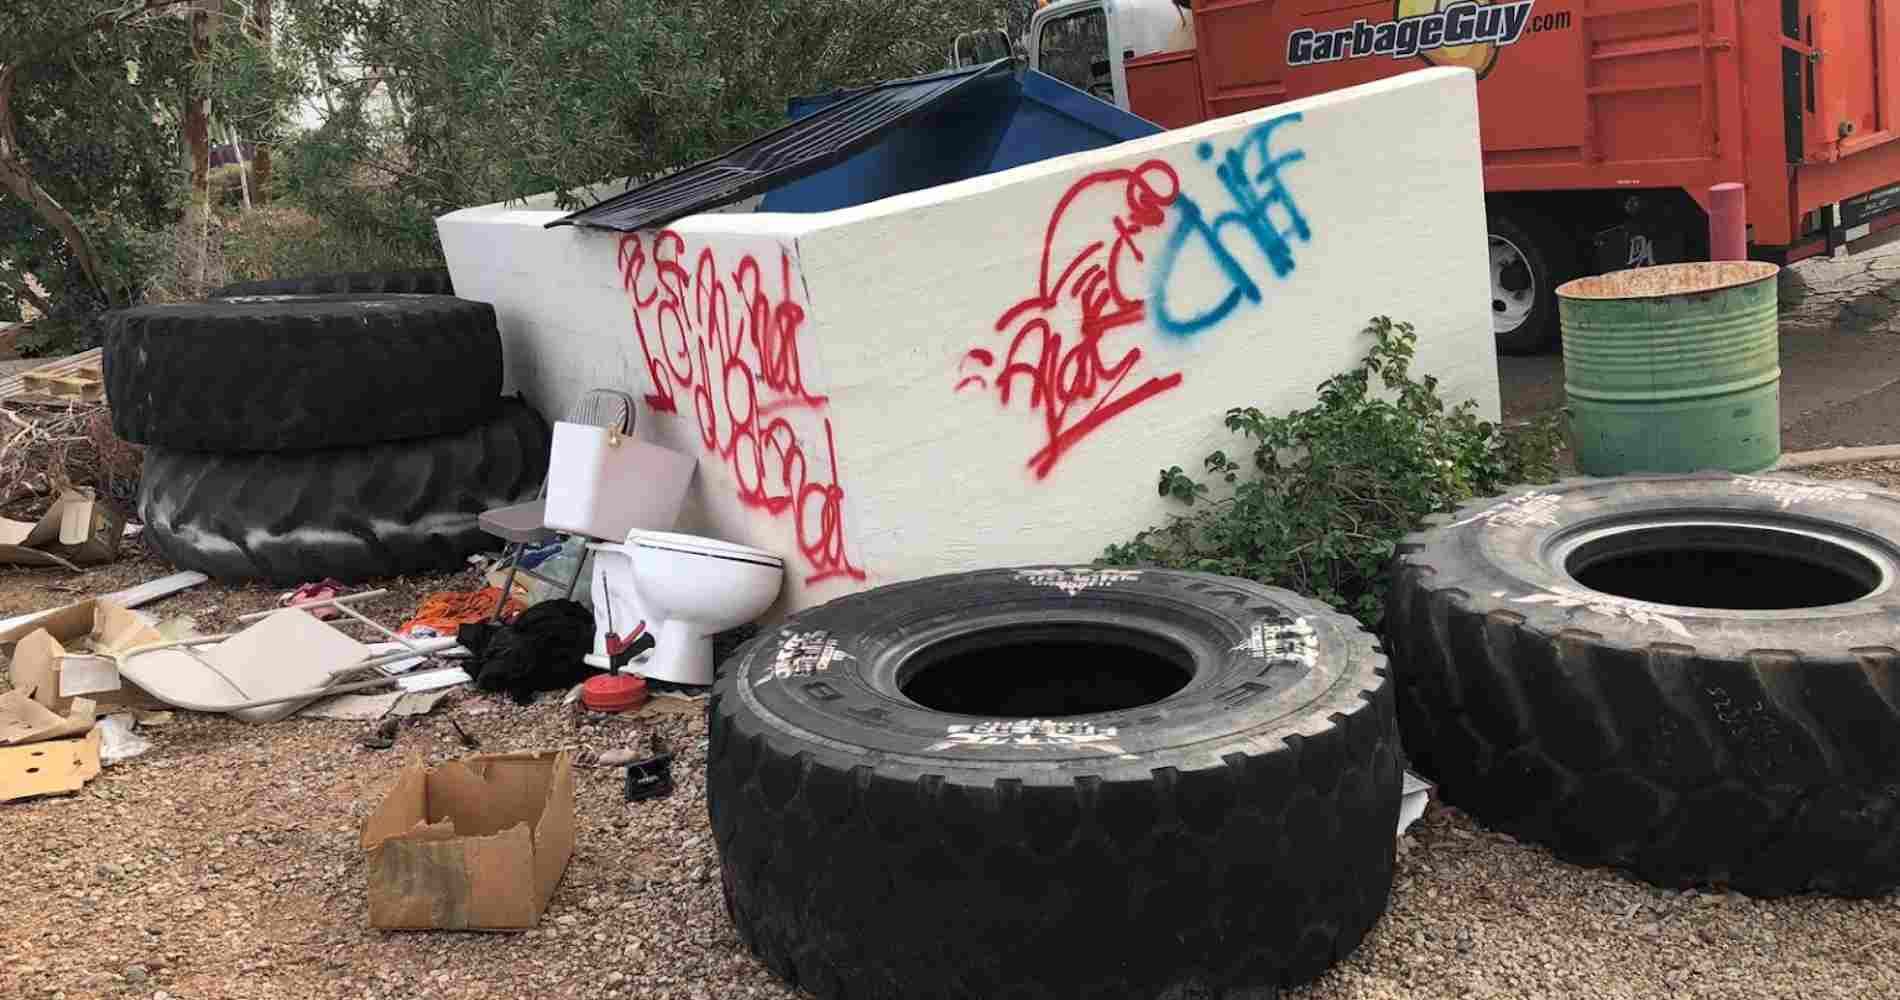 #1 for Tire Disposal in Glendale, AZ with Over 1200 5-Star Reviews!